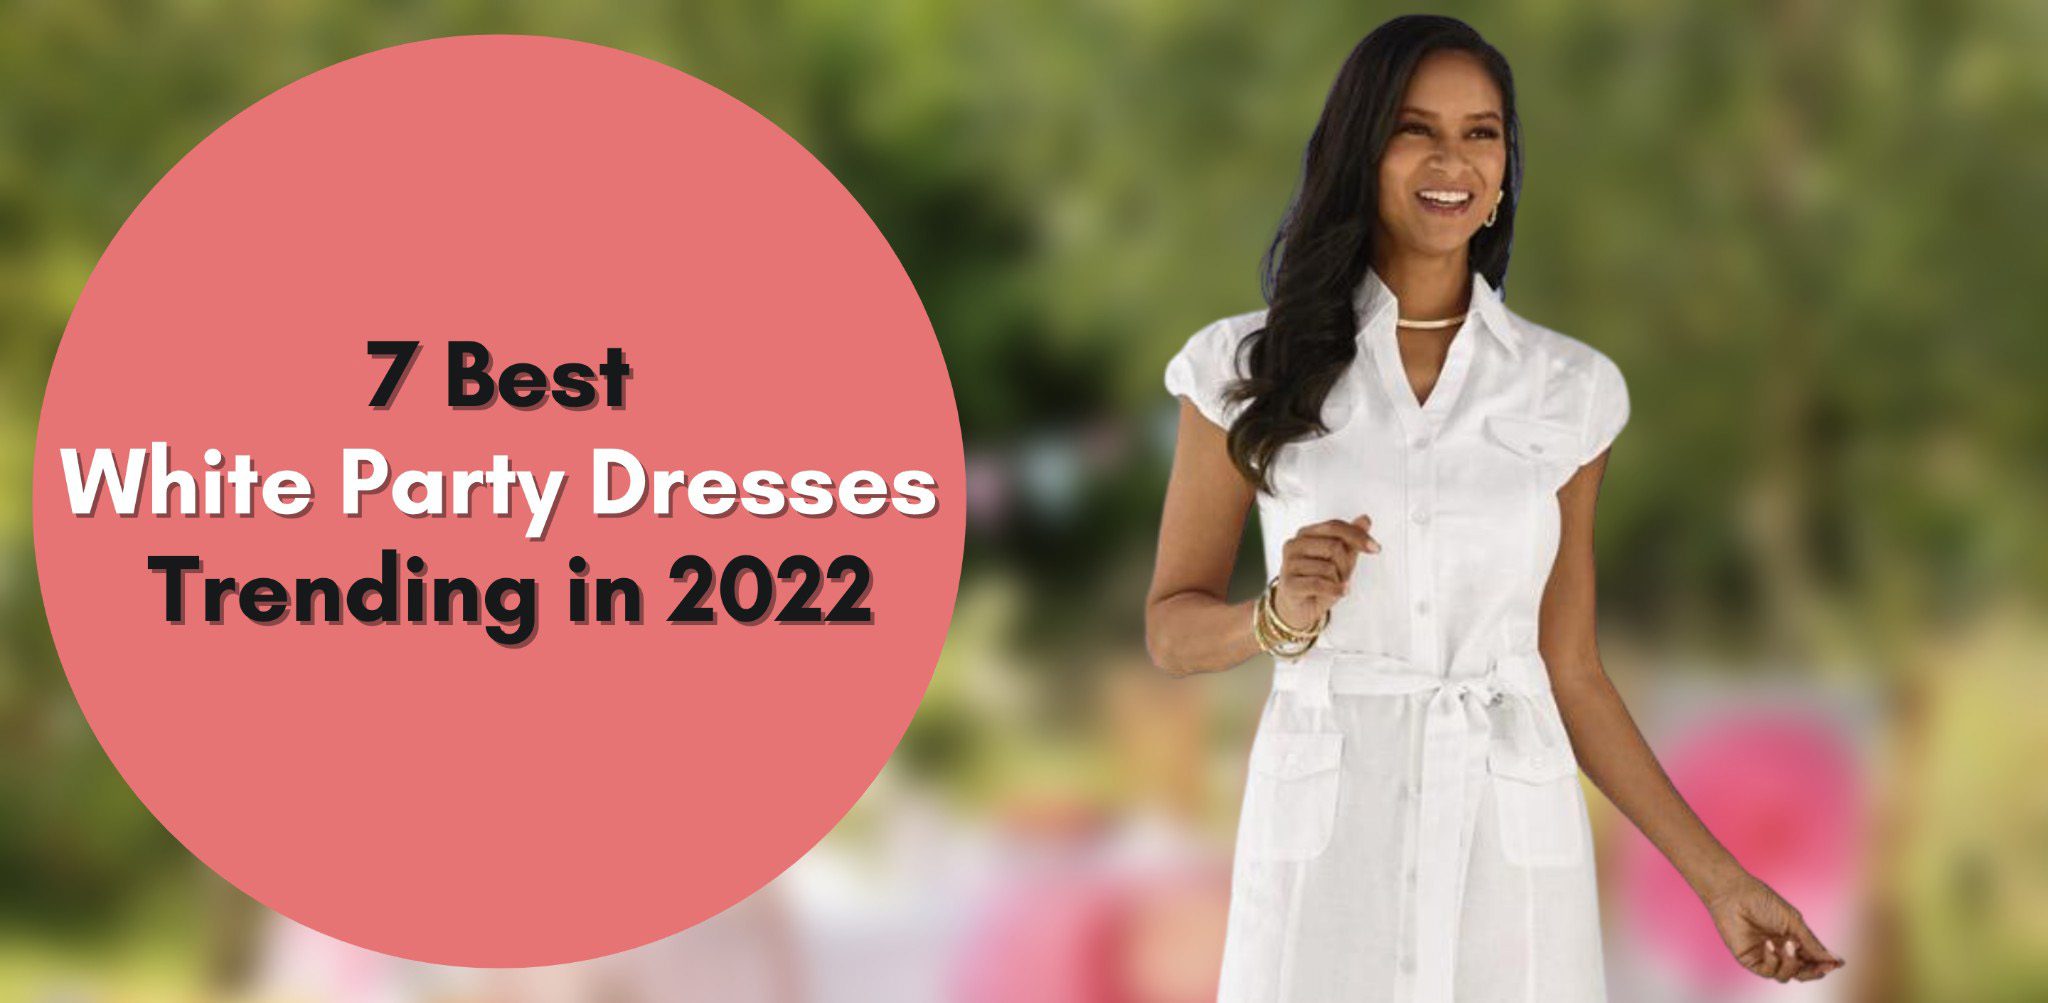 7 best white party dresses